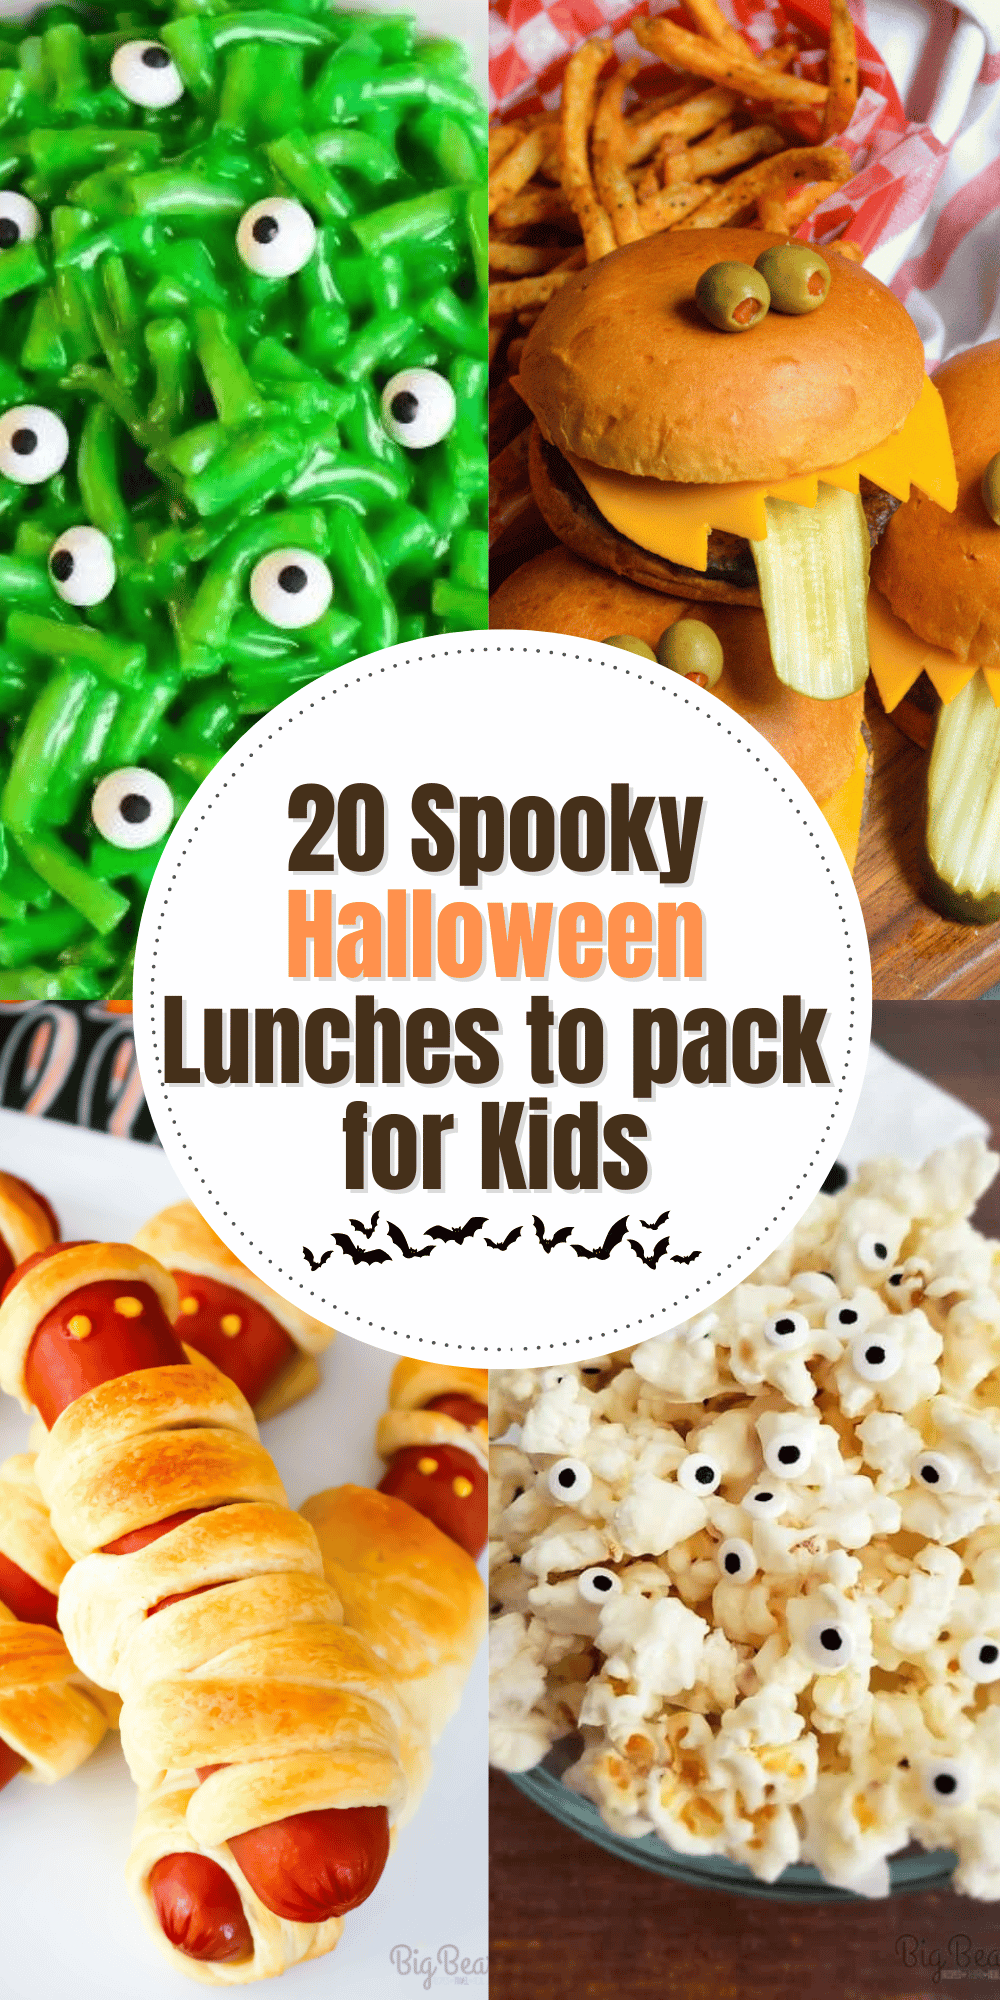 Grab these fun spooky lunch ideas to make up some Halloween lunchboxes for the kids (or yourself!) during the month of October! Savory, Sweet and Snackable Recipes included! via @bigbearswife